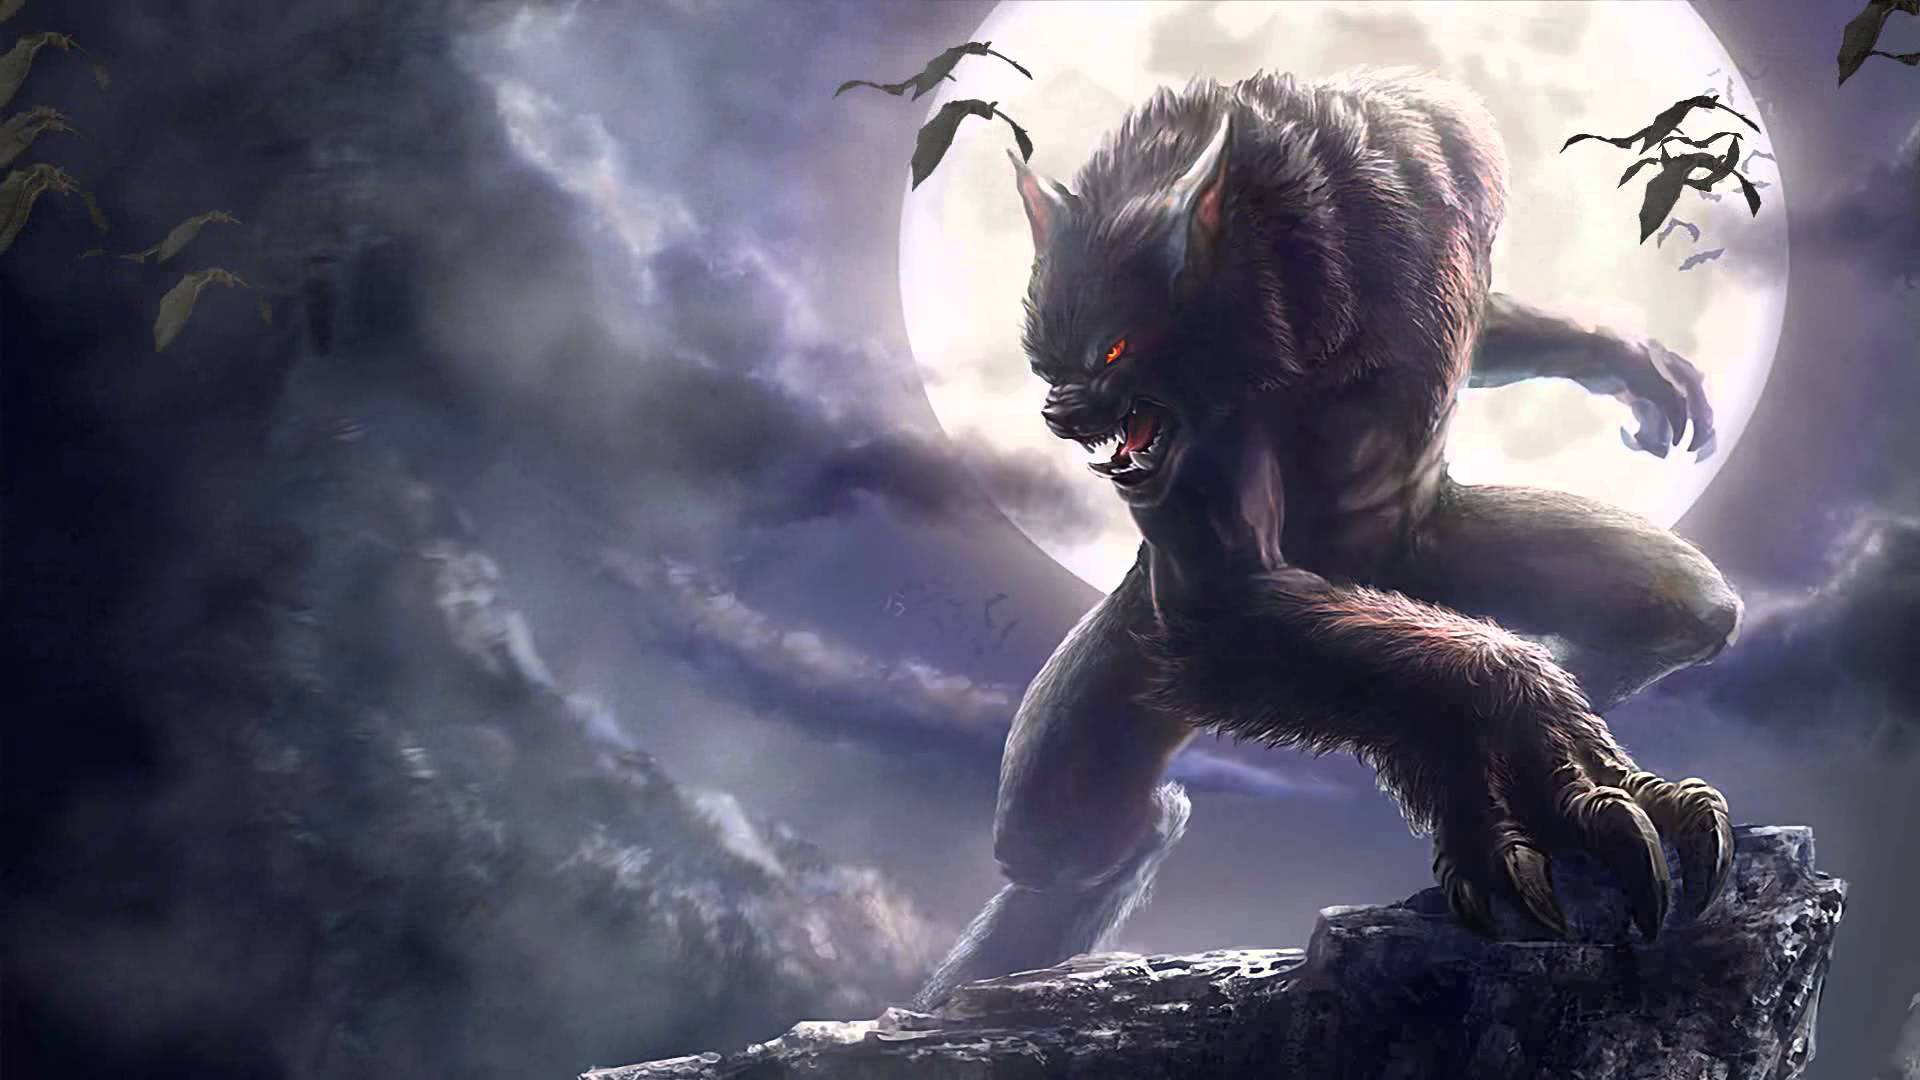 Werewolf Wallpapers HD Backgrounds, Image, Pics, Photos Free